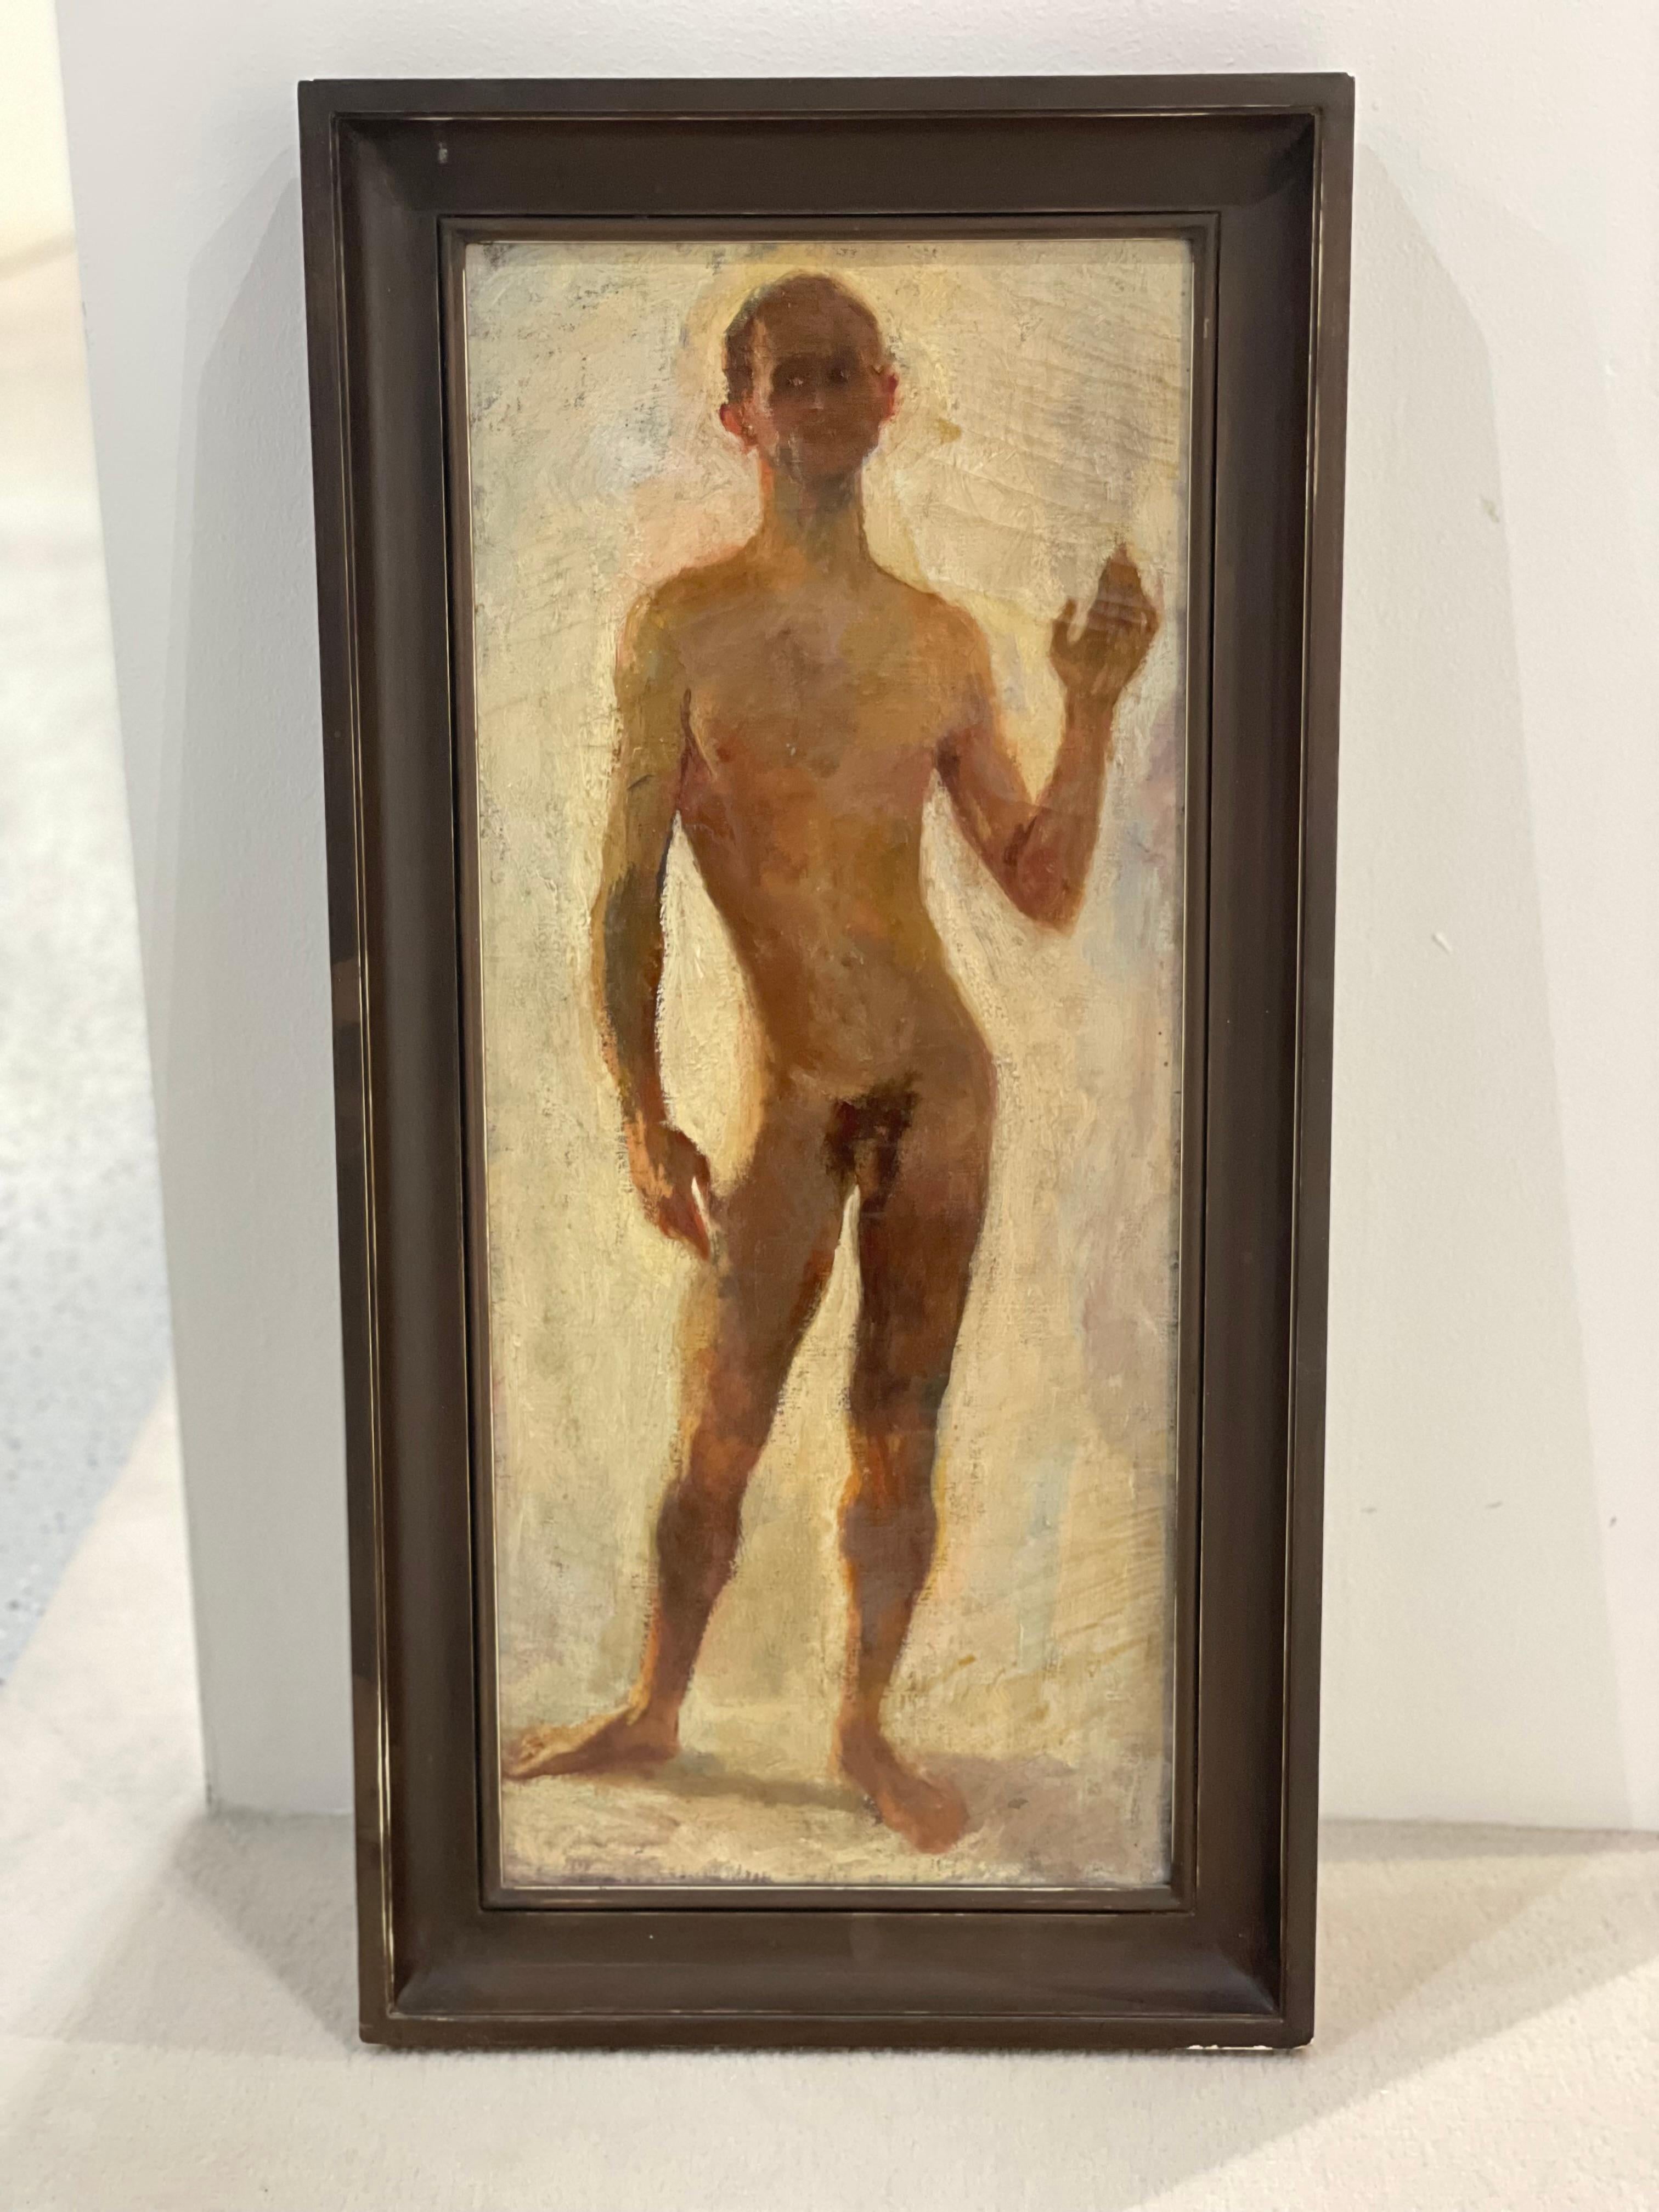 Oil on canvas shows a standing naked man saluting with his left hand.